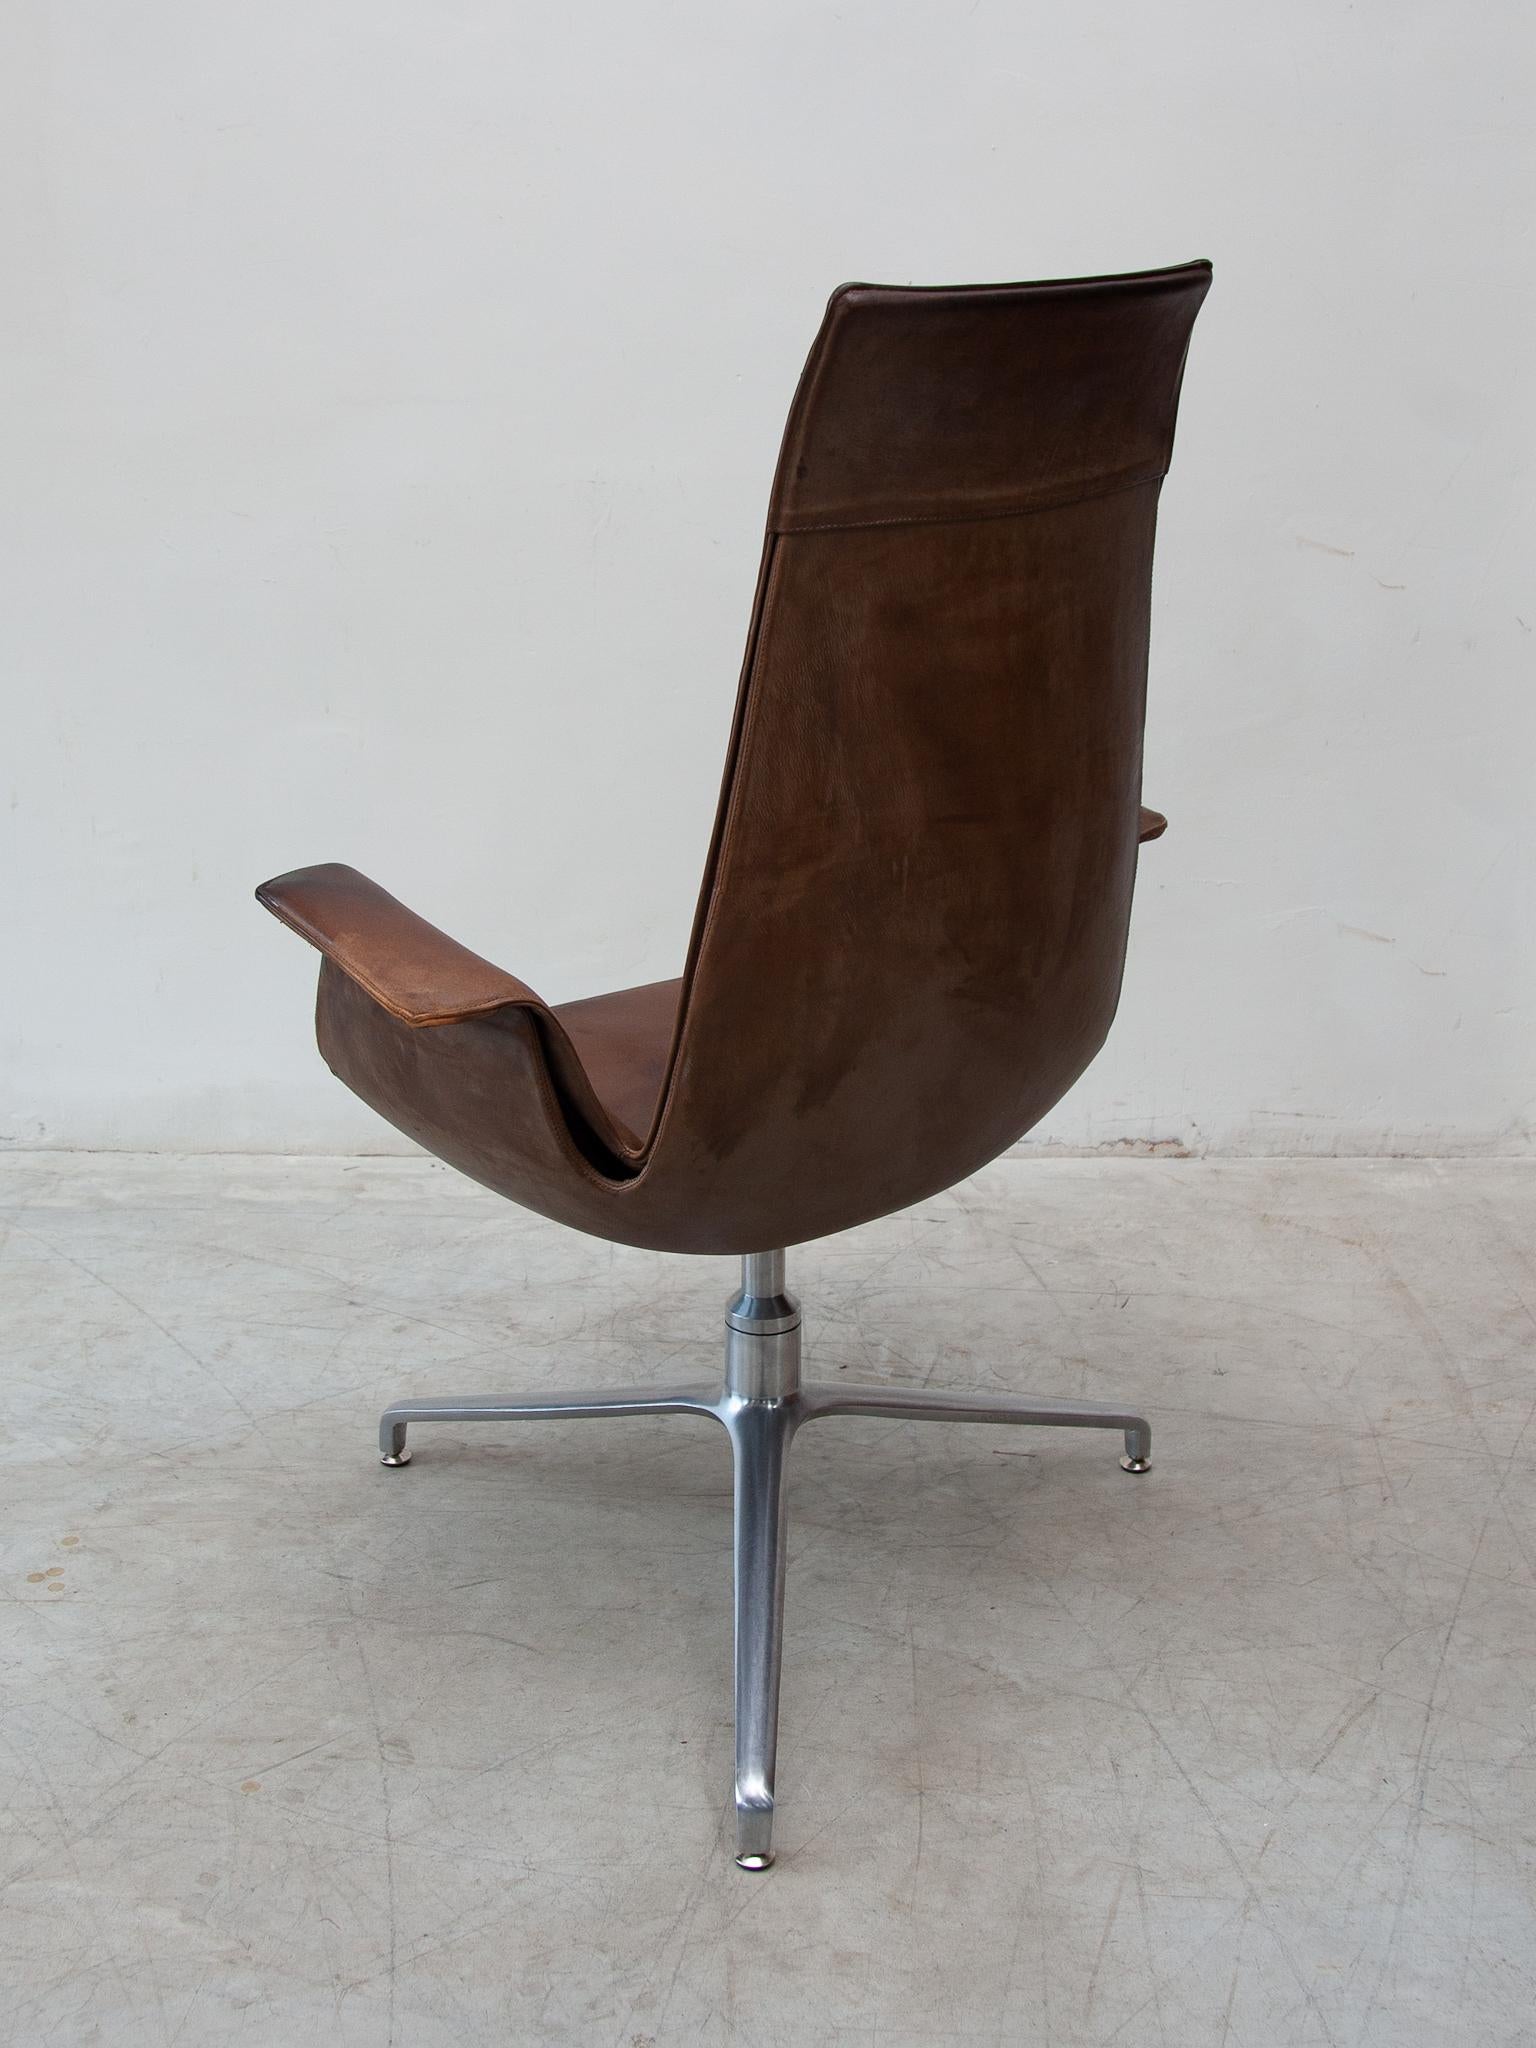 Stainless Steel Fabricius & Kastholm FK6725 Desk, Lounge Chair in Brown Leather, Kill